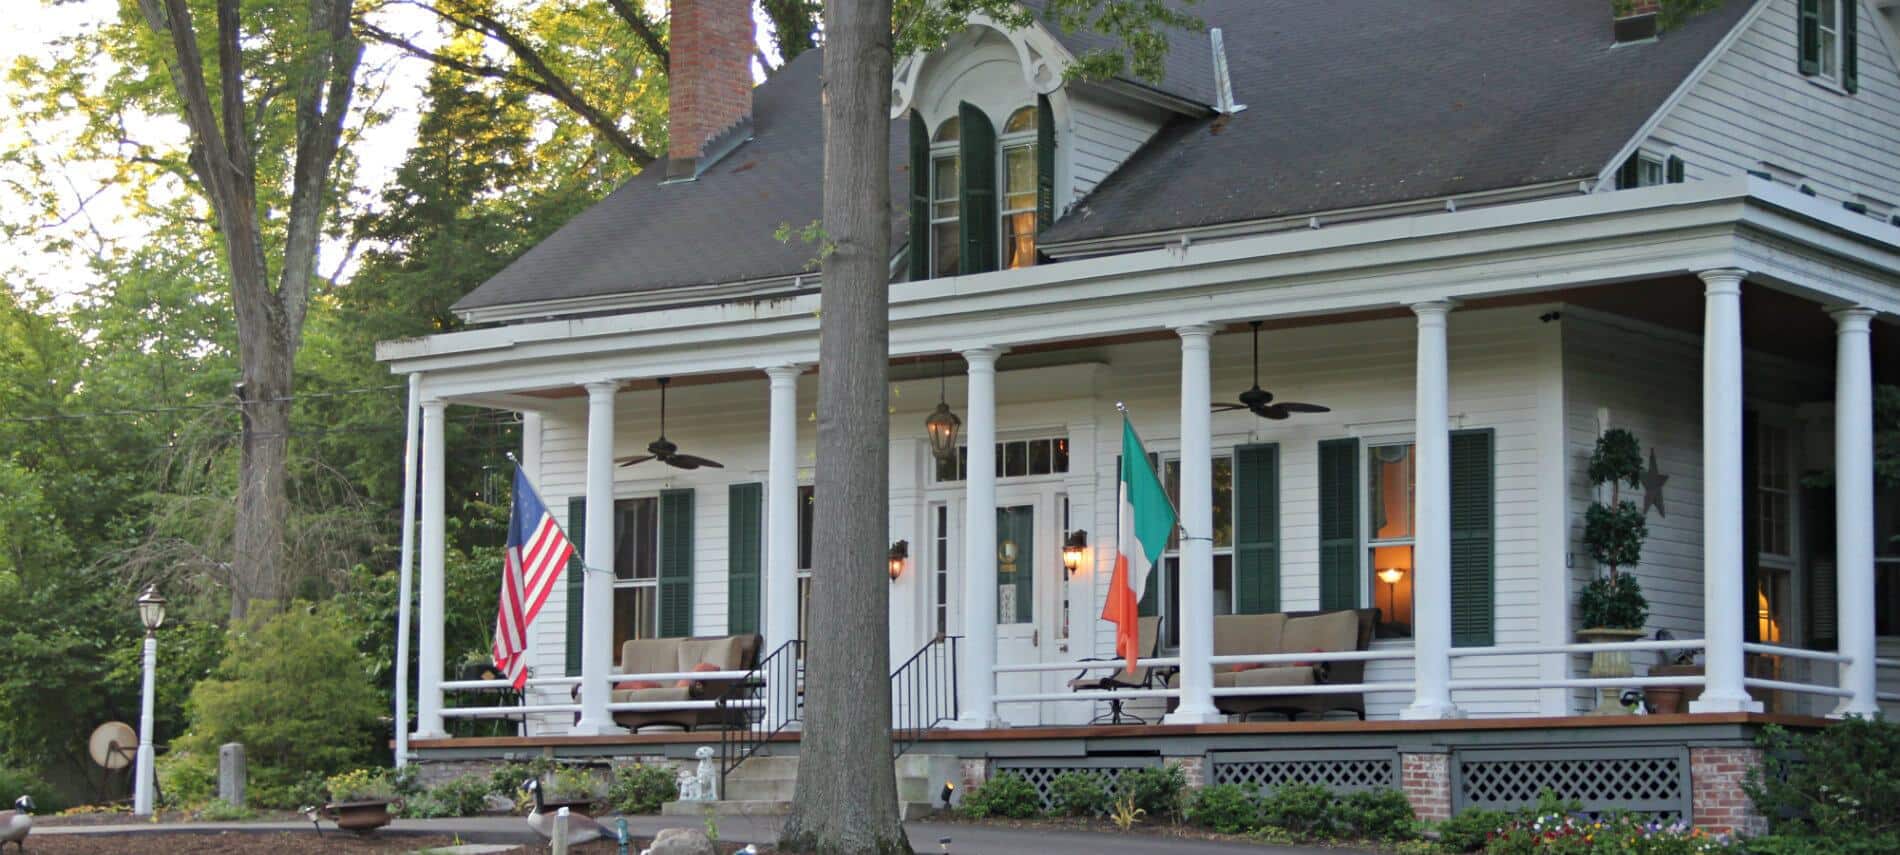 Front view of two-story white house with green shutters surround by woods, porch with furniture, American Flag.